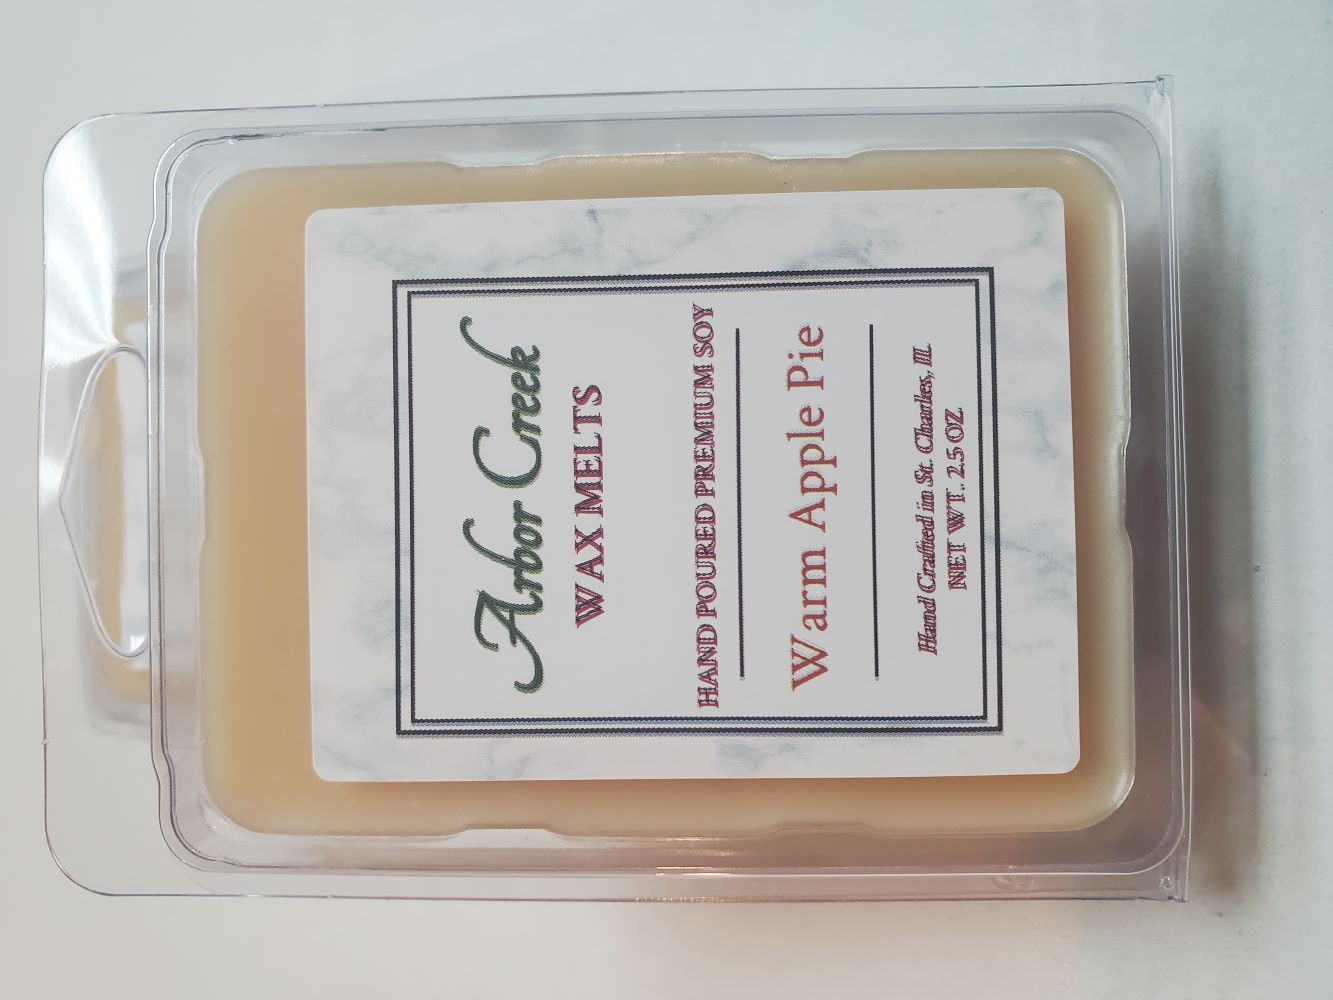 Arbor Creek Candle 100% Soy Warm Apple Pie Wax Melts